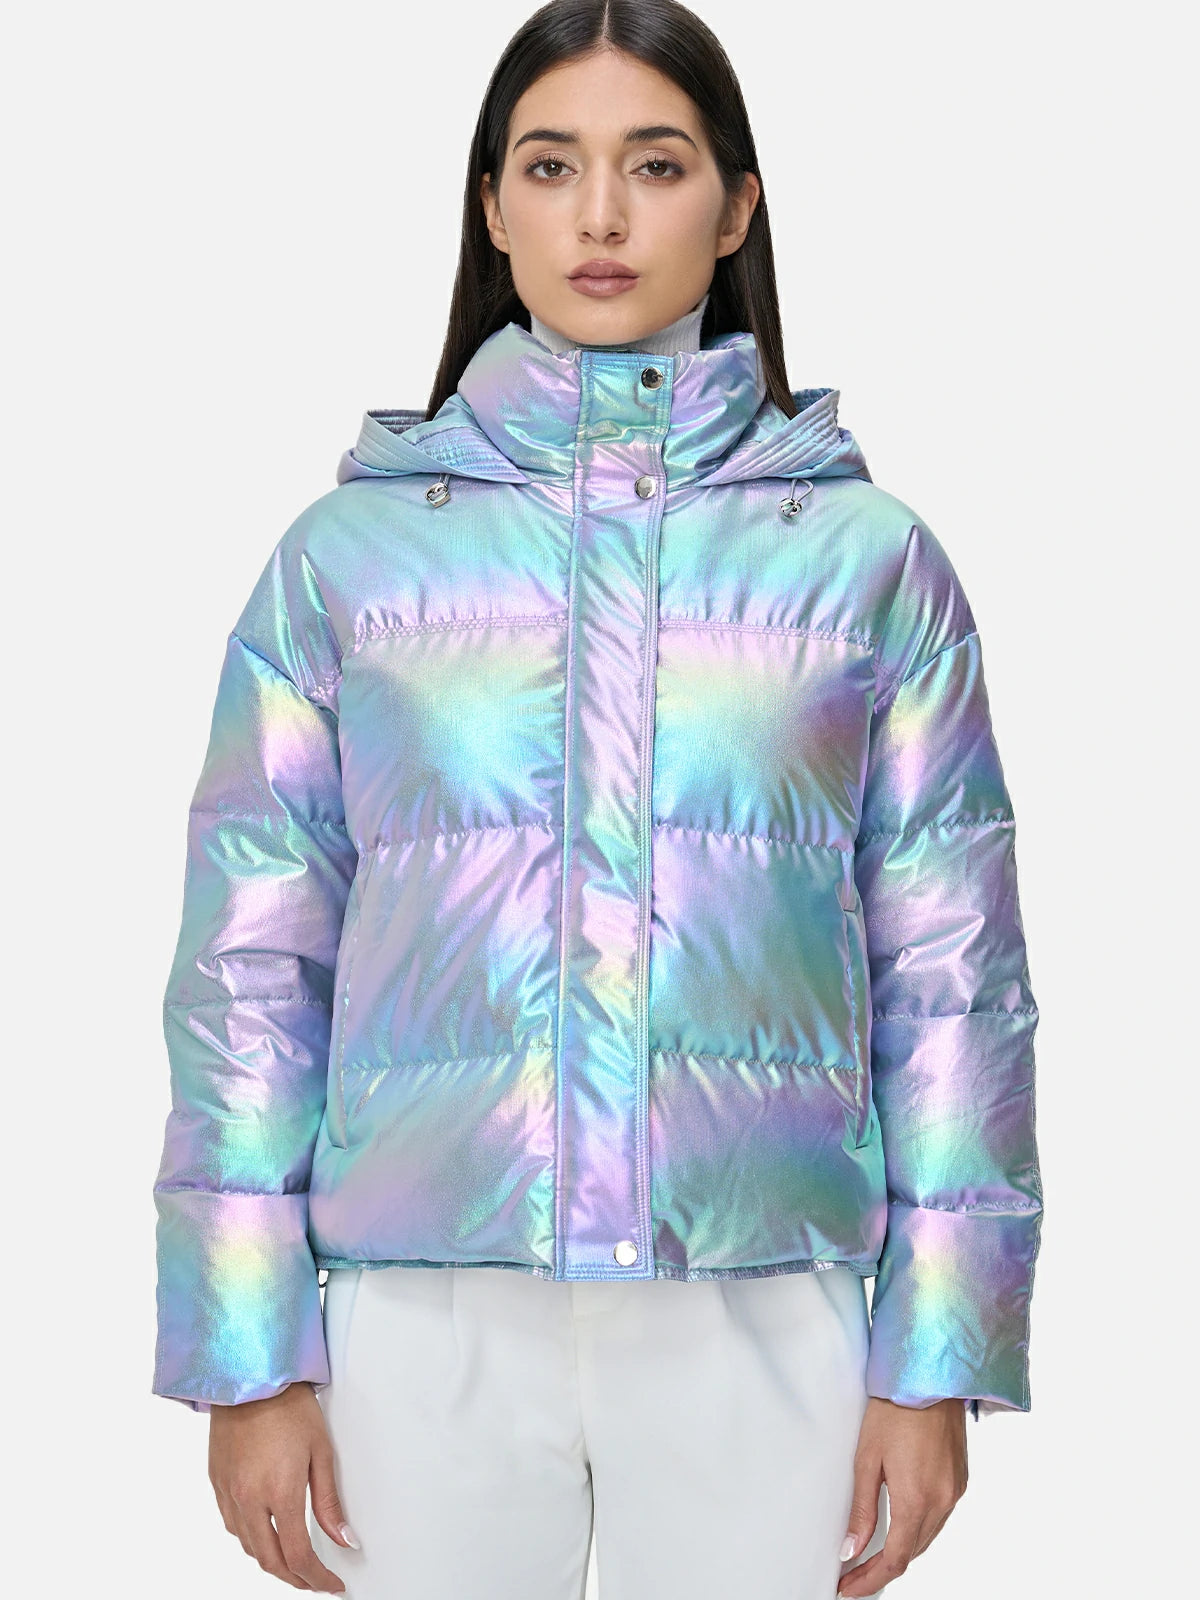 Iridescent Winter Jacket with Hood and Adjustable Drawstrings